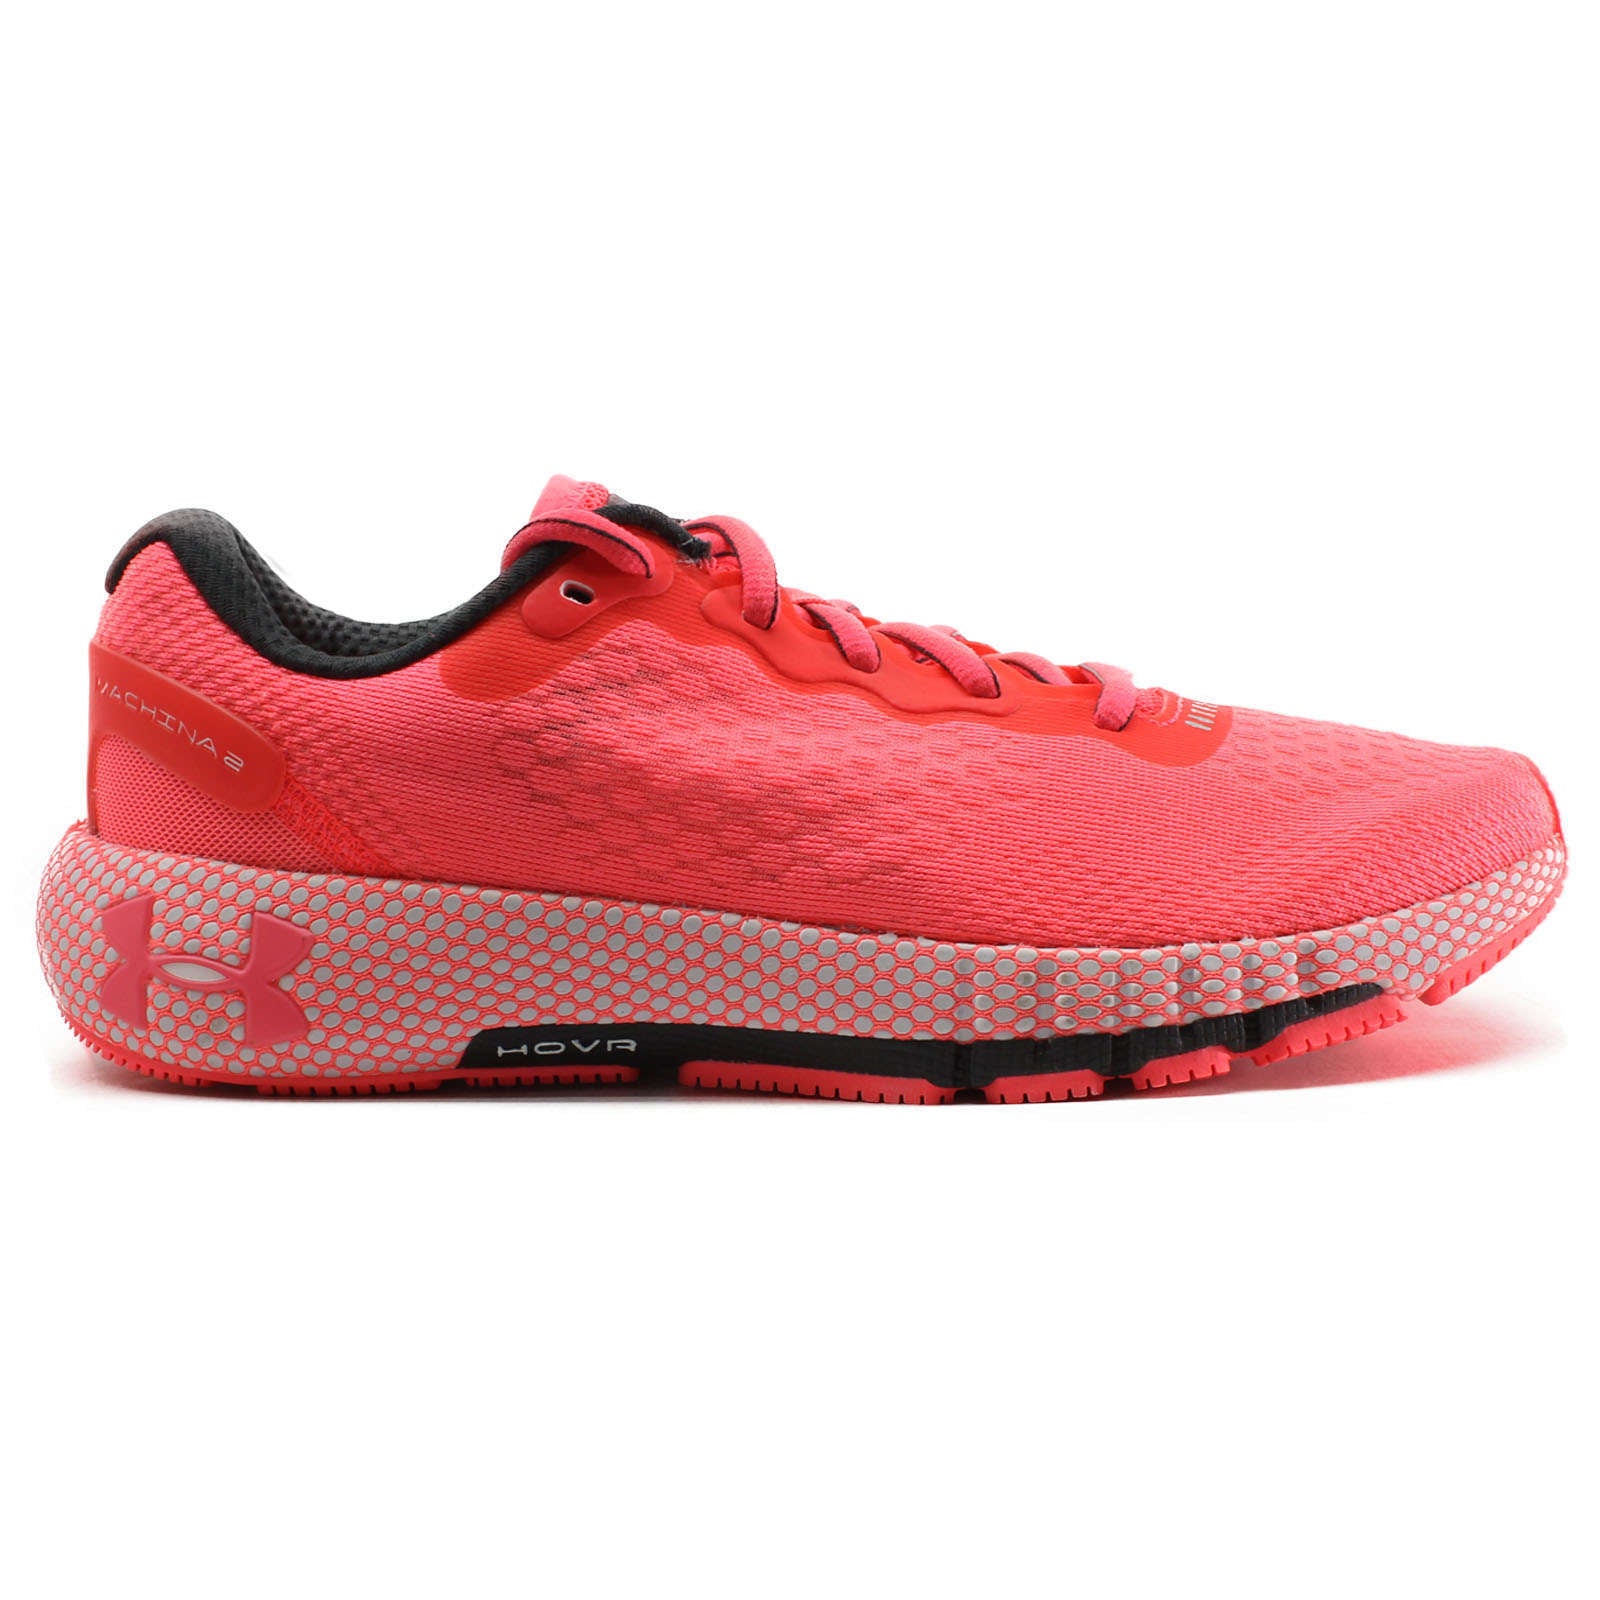 Under Armour HOVR Machina 2 Synthetic Textile Women's Low-Top Trainers